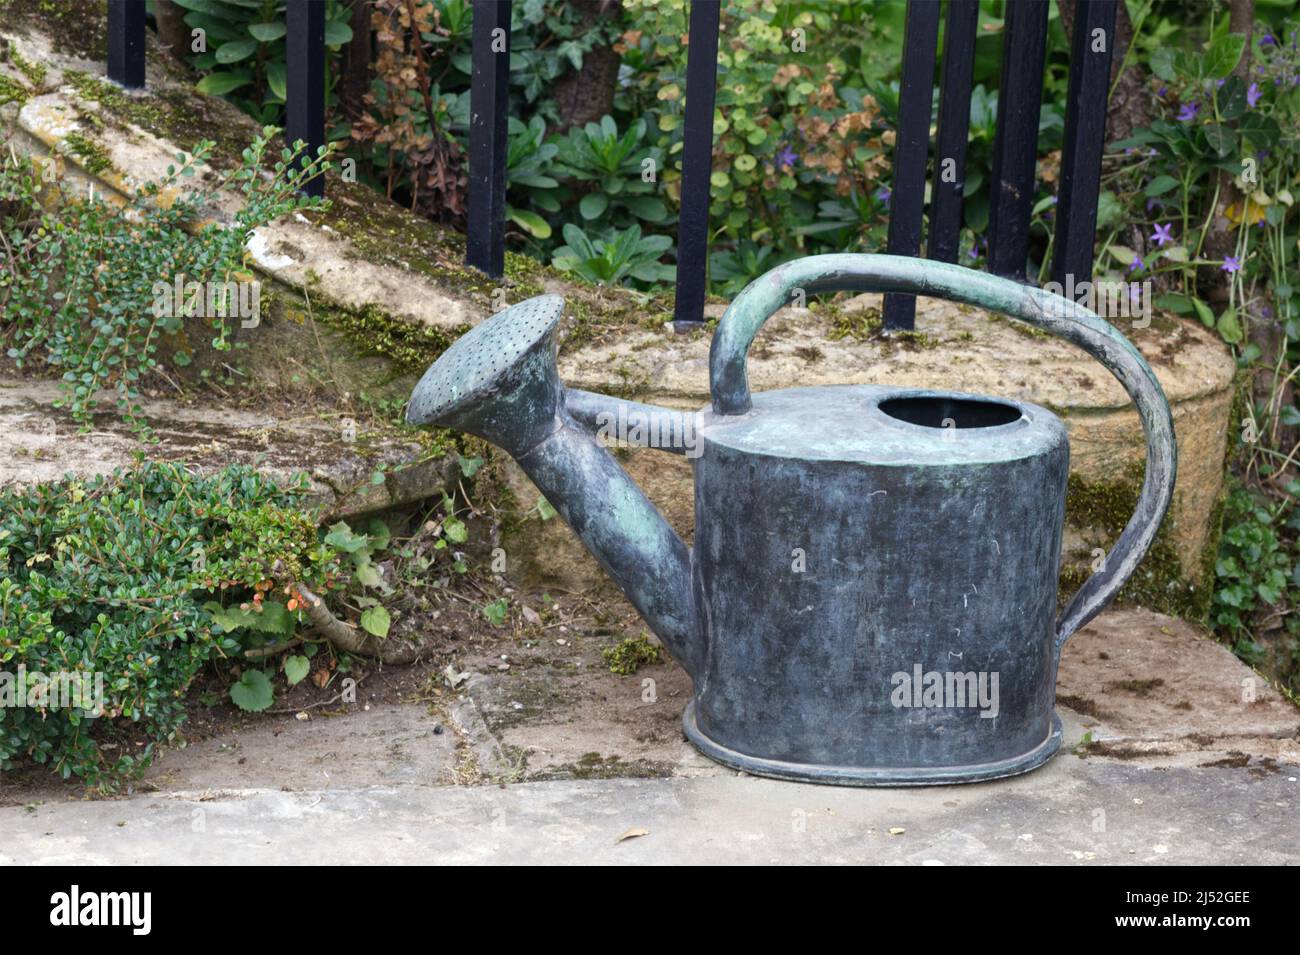 vintage metal watering can in the garden Stock Photo